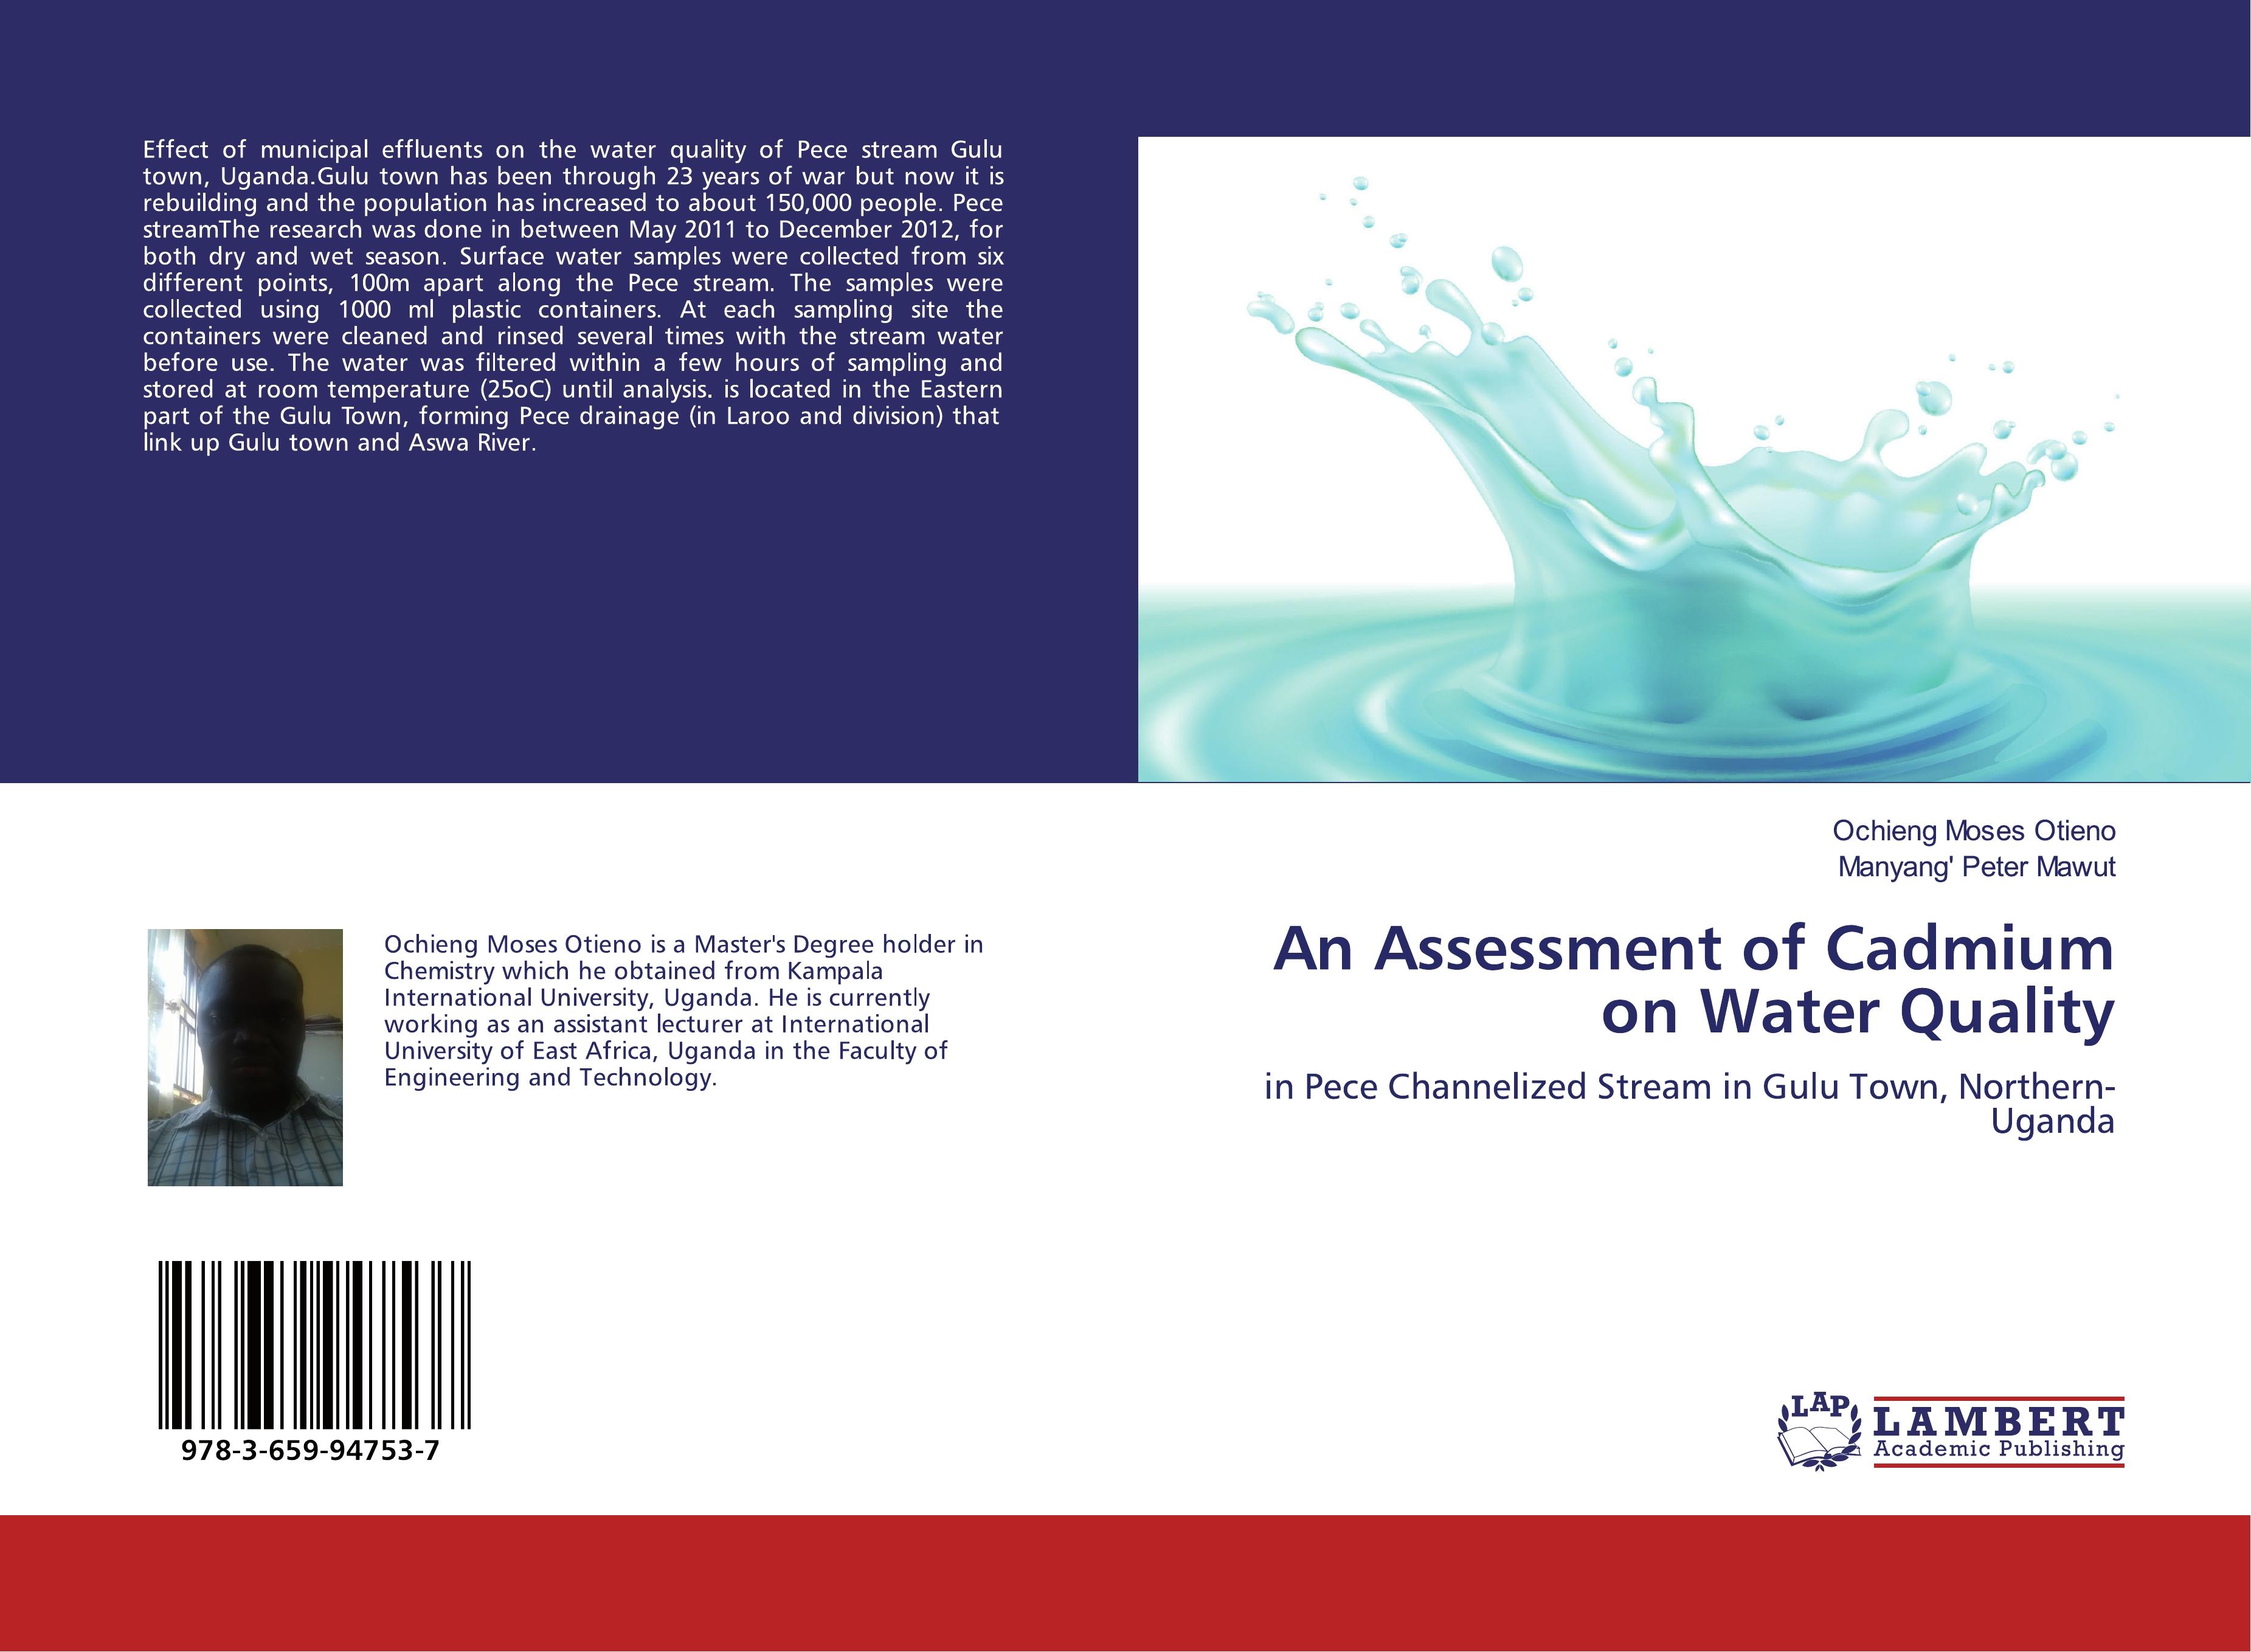 An Assessment of Cadmium on Water Quality - Moses Otieno, Ochieng